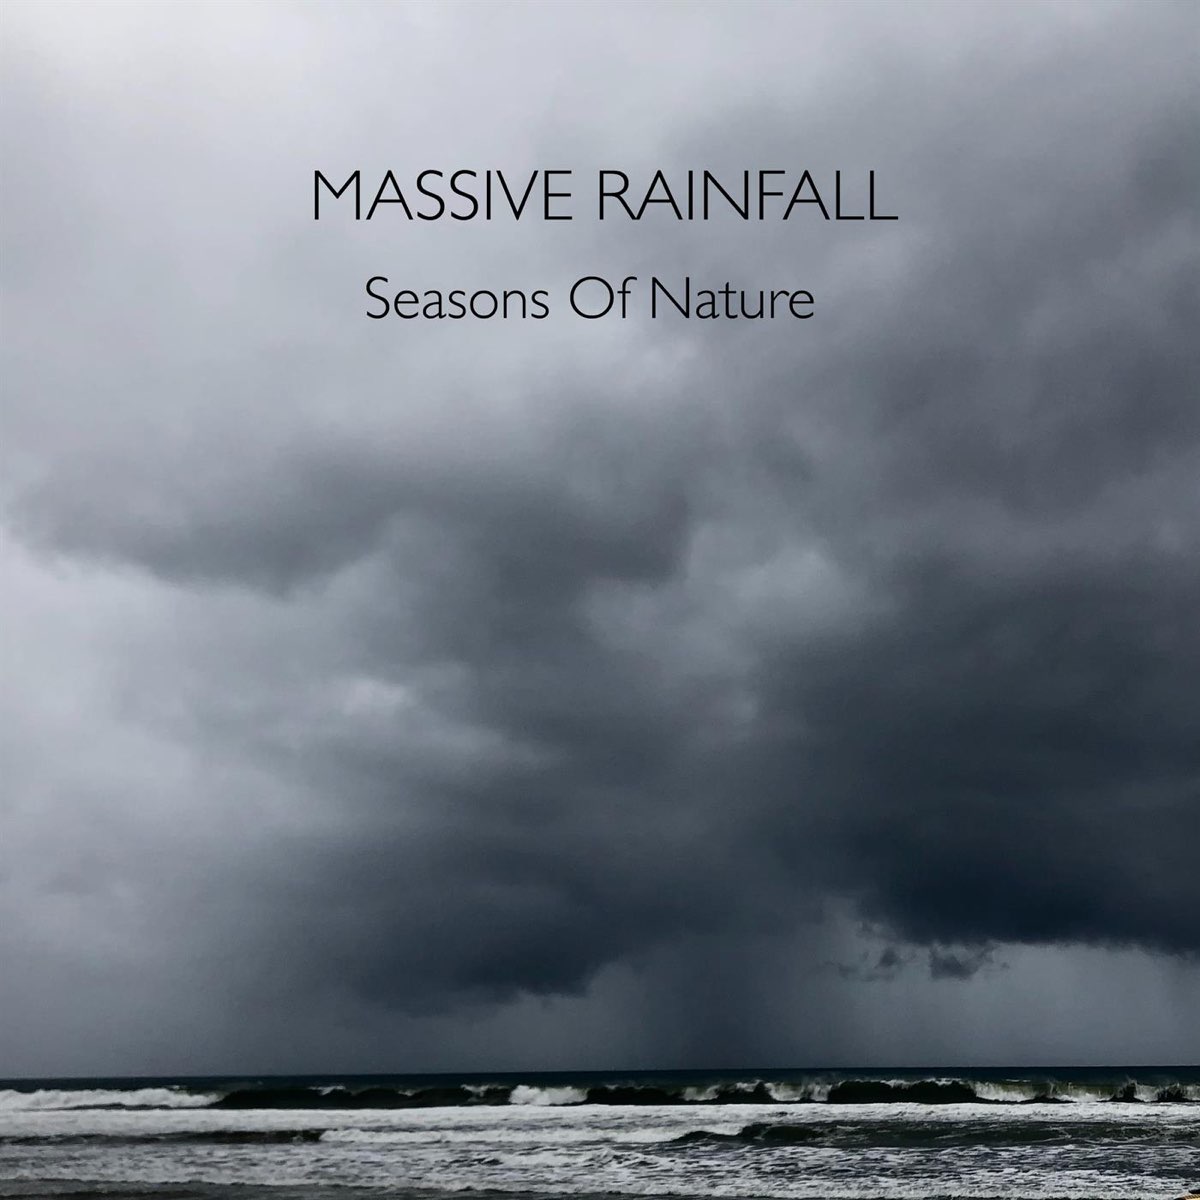 Massive natural. Nothing more waiting on Rain [Ep].